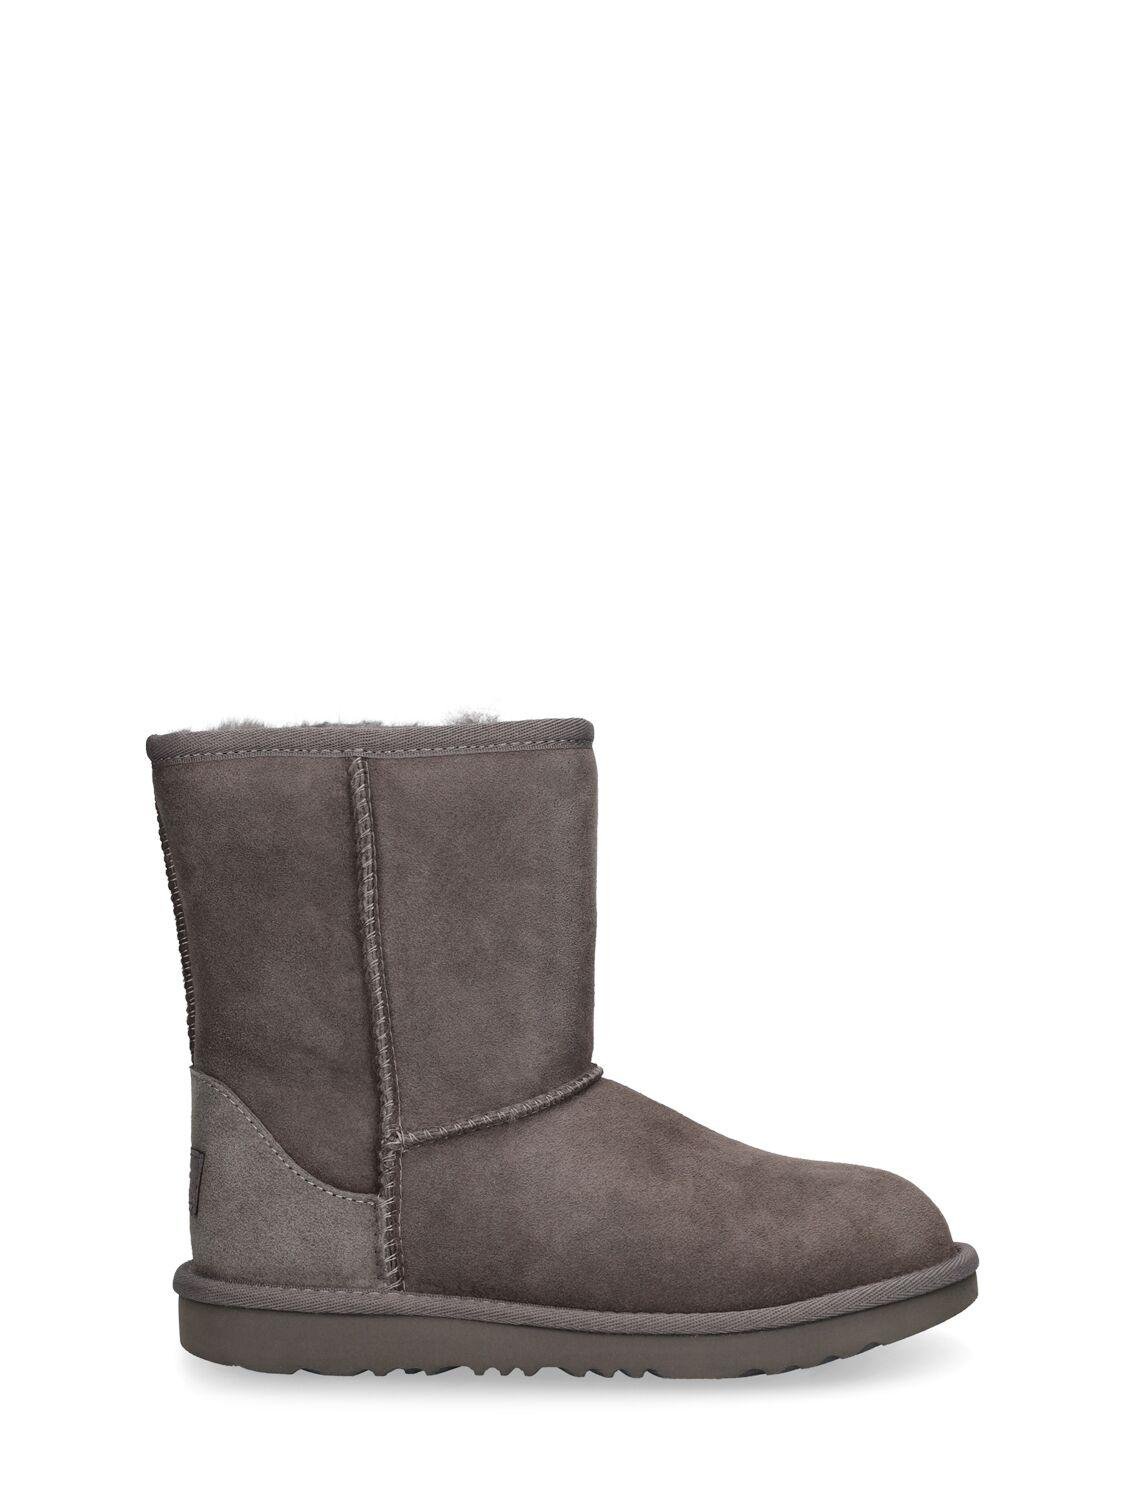 Classic Ii Shearling Boots by UGG